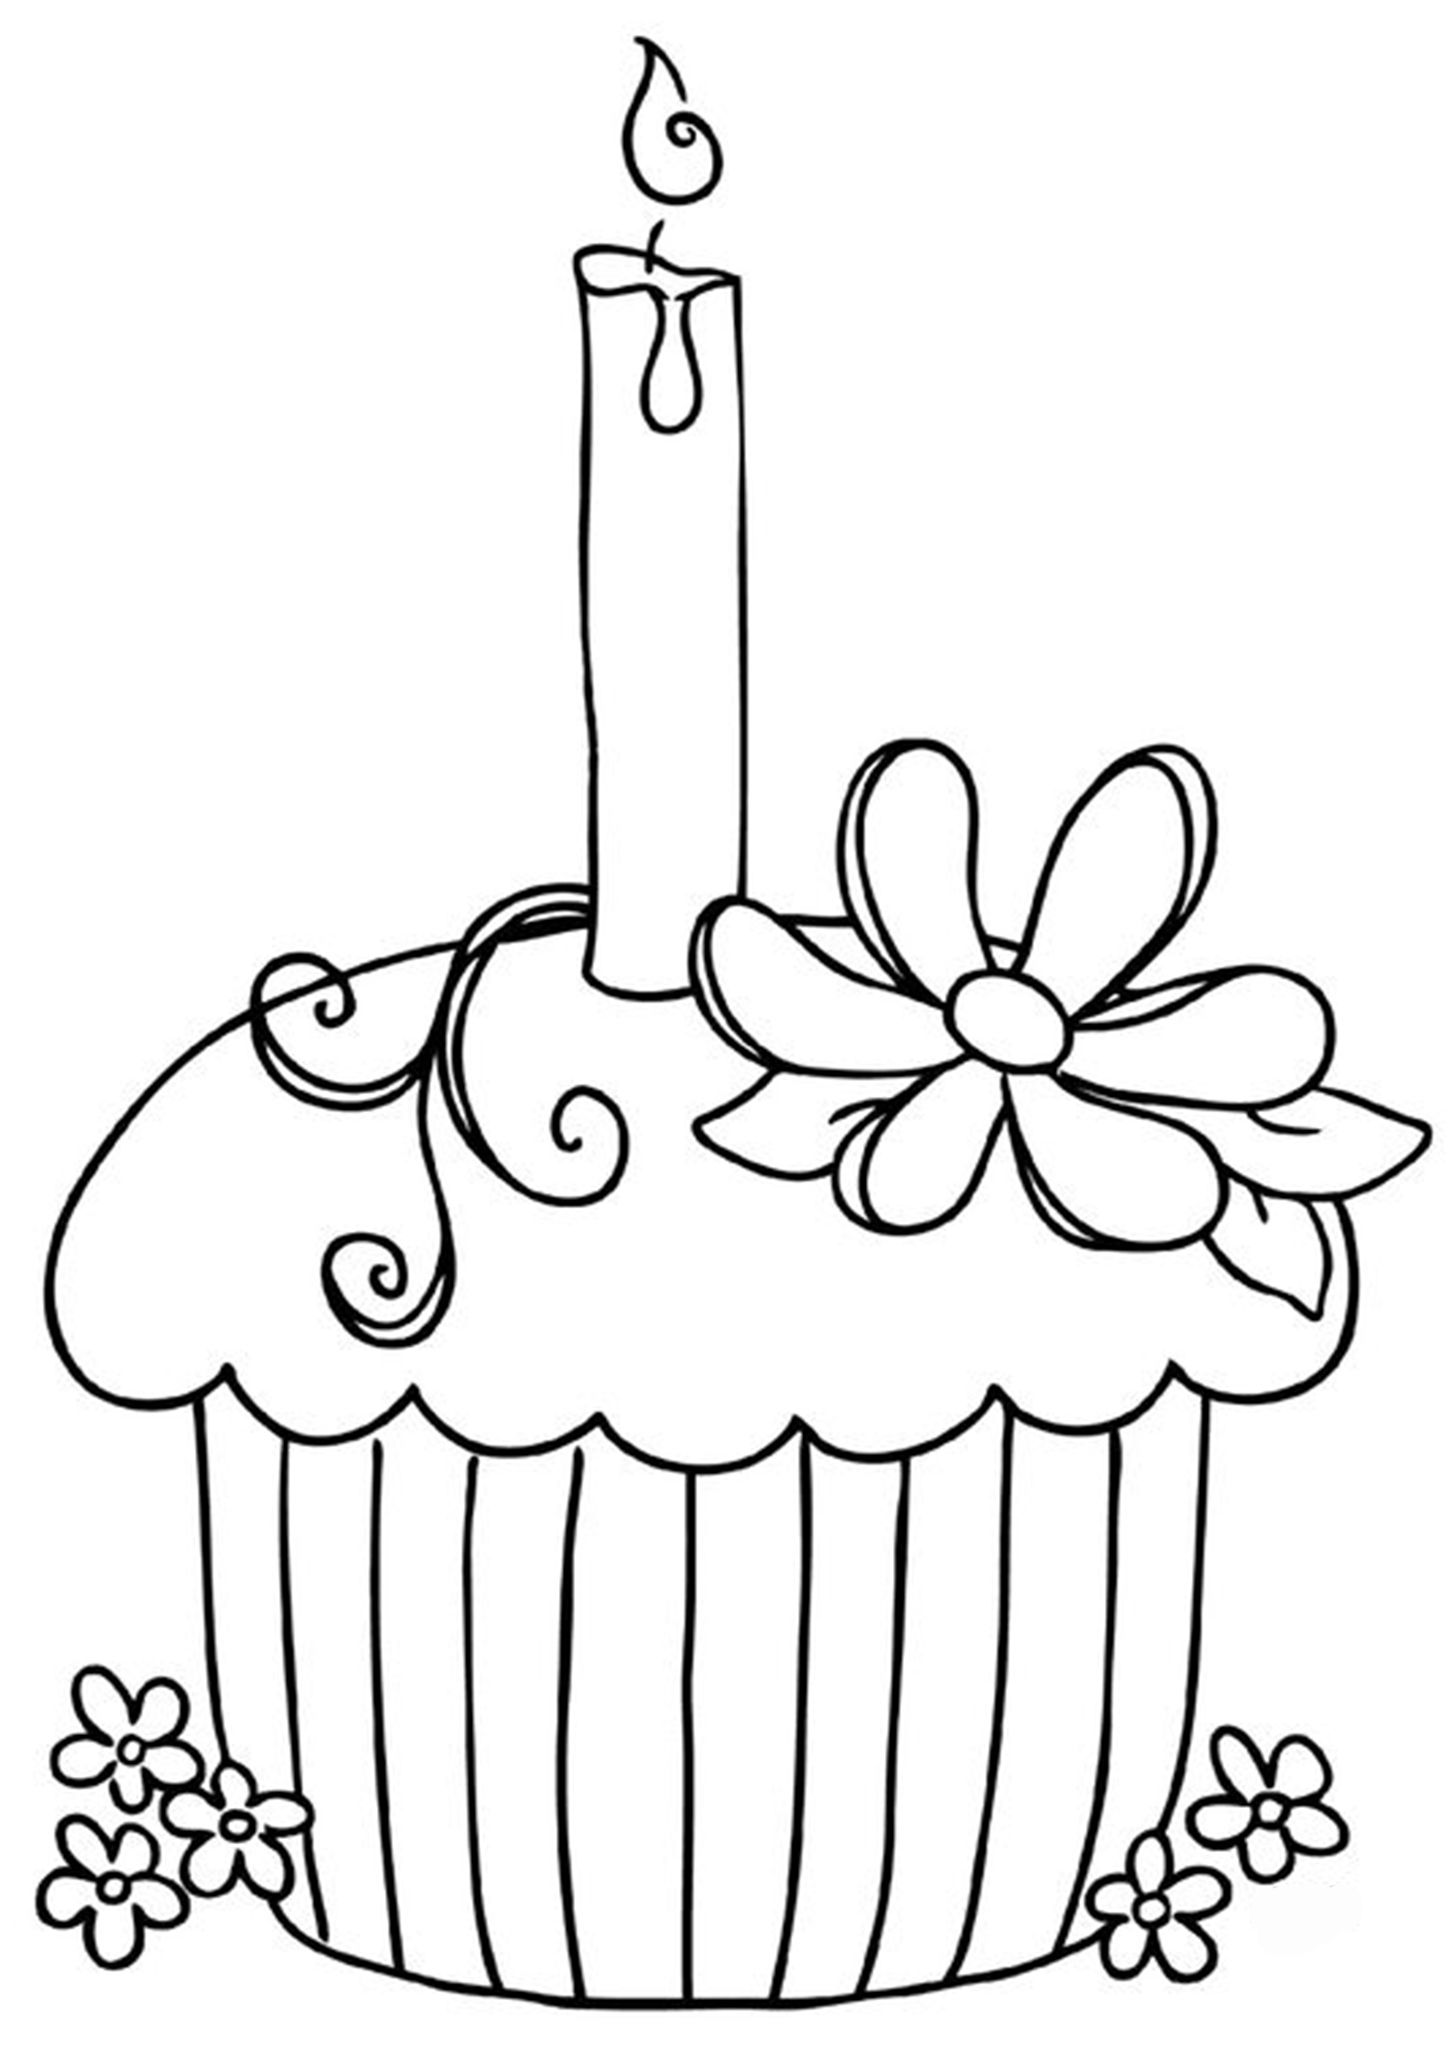 Free easy to print cupcake coloring pages birthday coloring pages happy birthday coloring pages cupcake coloring pages